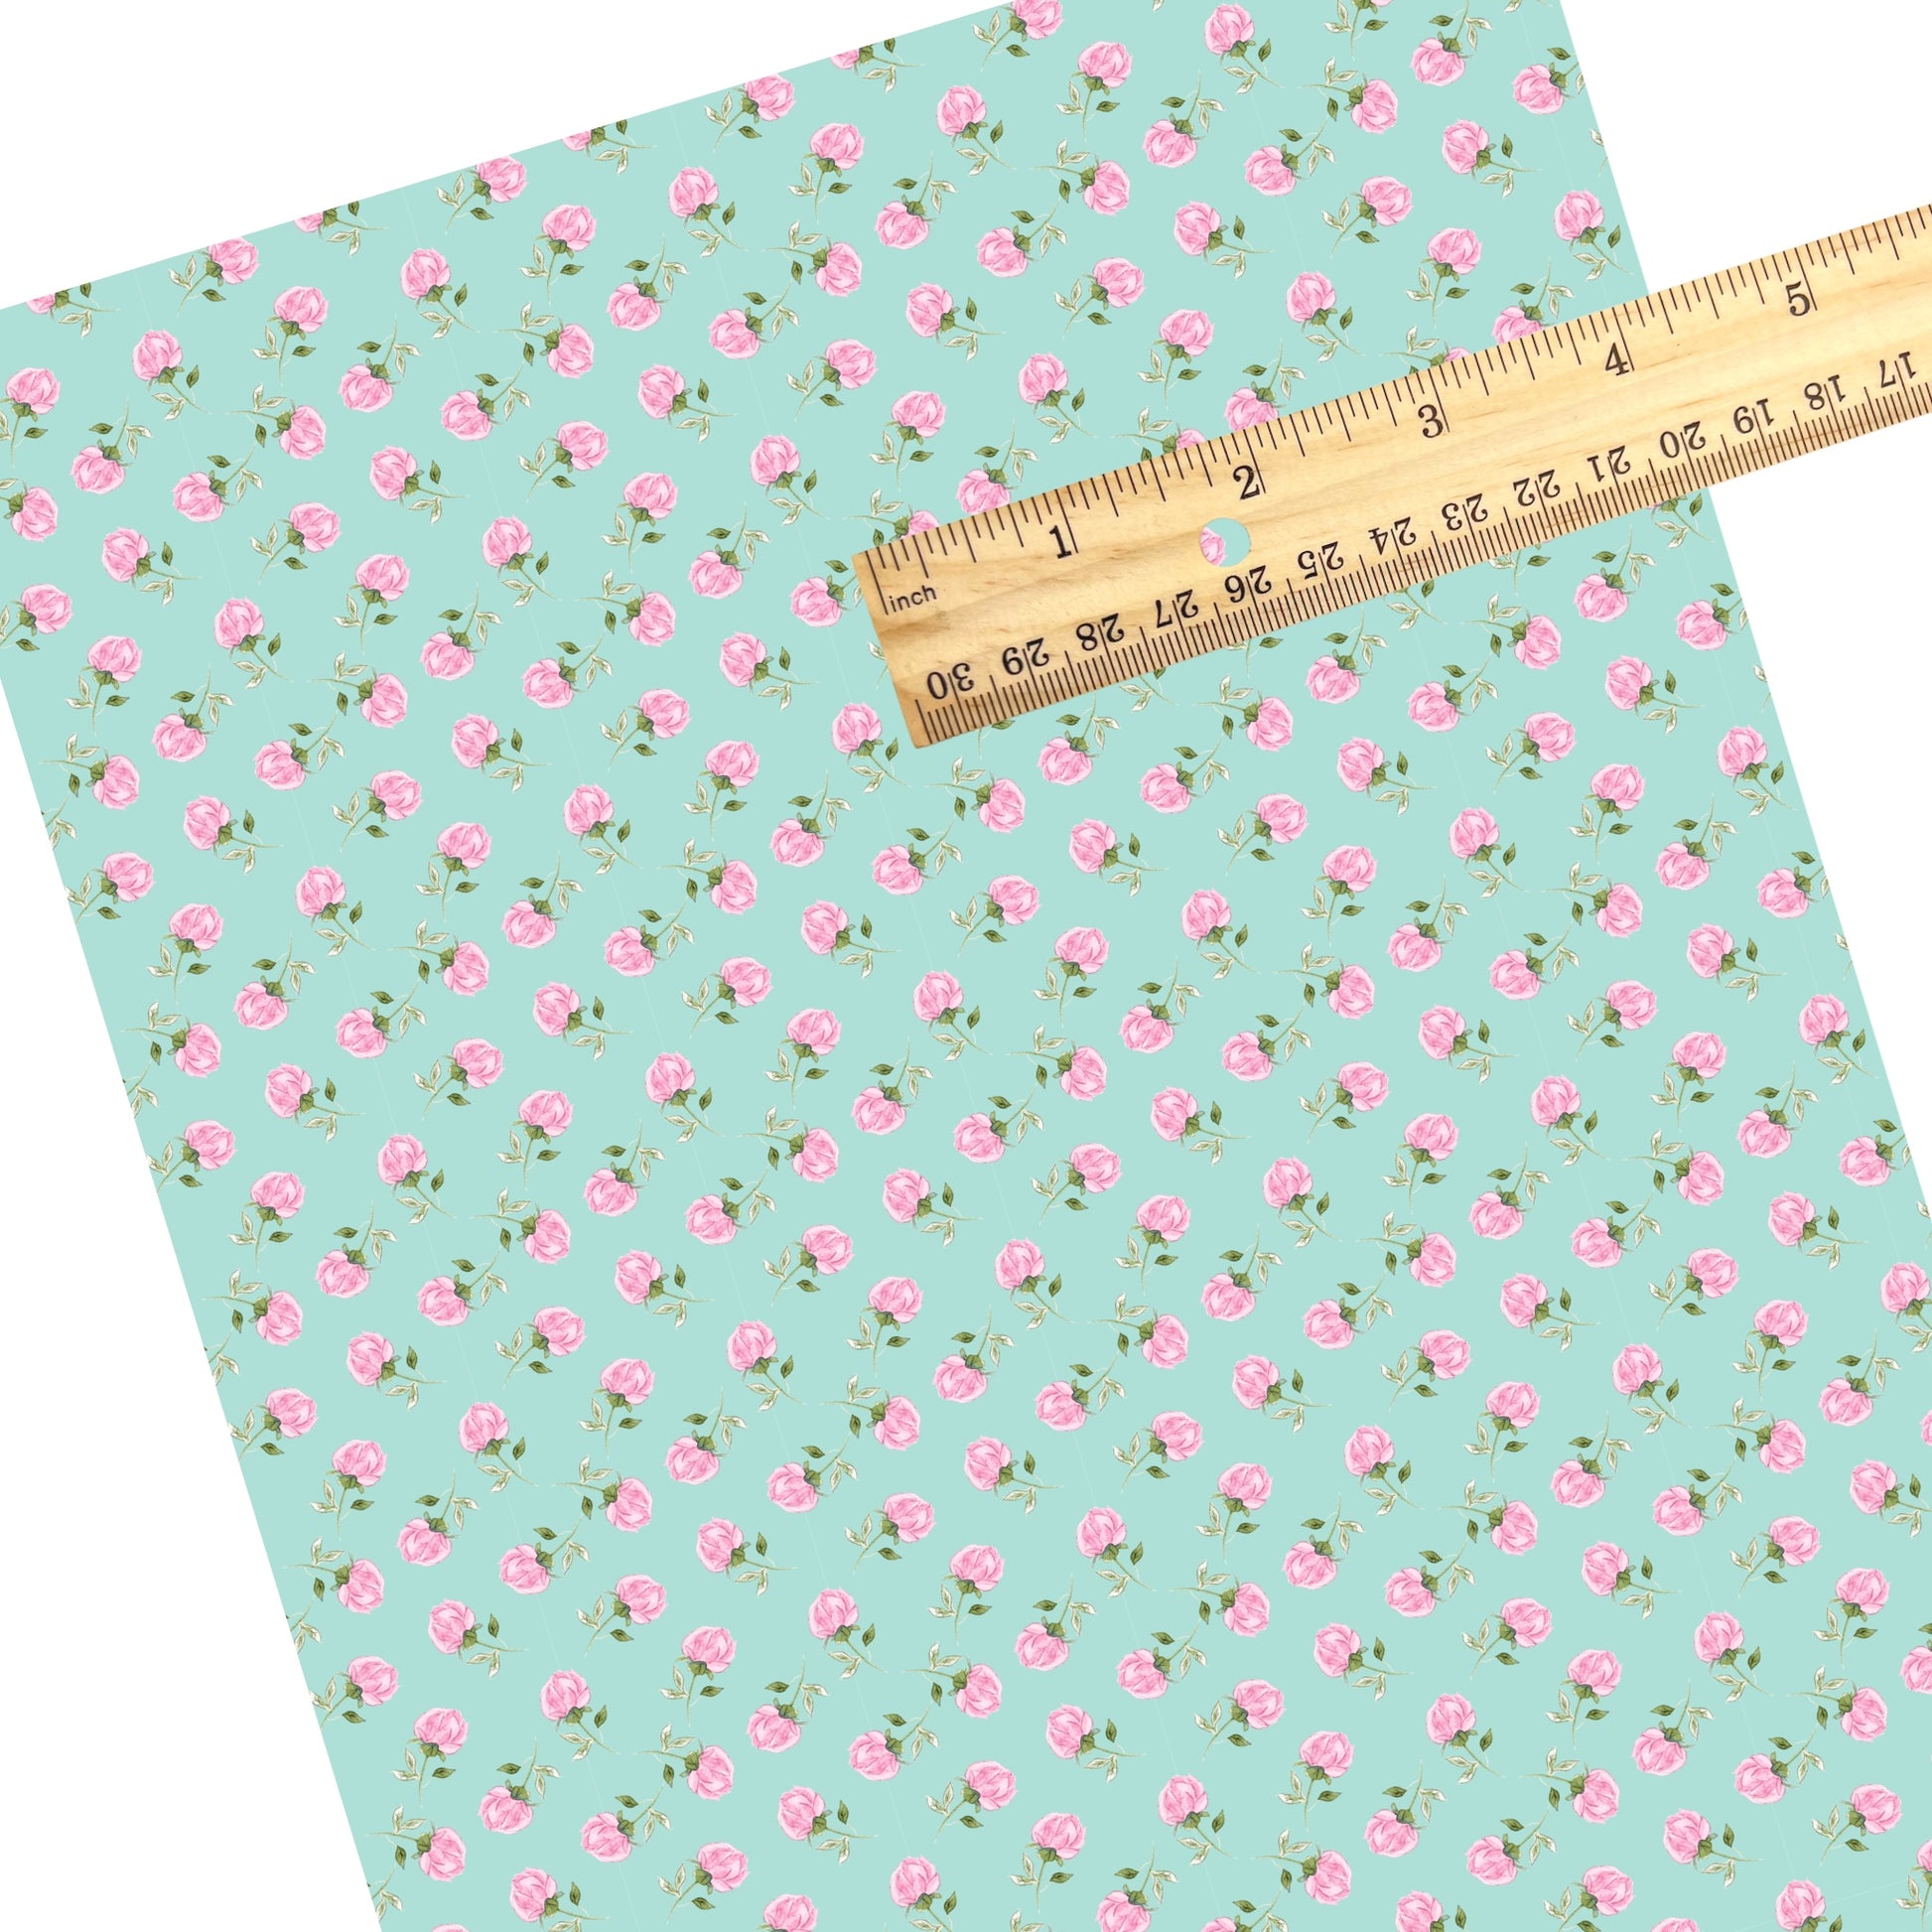 These summer faux leather sheets contain the following design elements: pink roses on aqua. Our CPSIA compliant faux leather sheets or rolls can be used for all types of crafting projects.